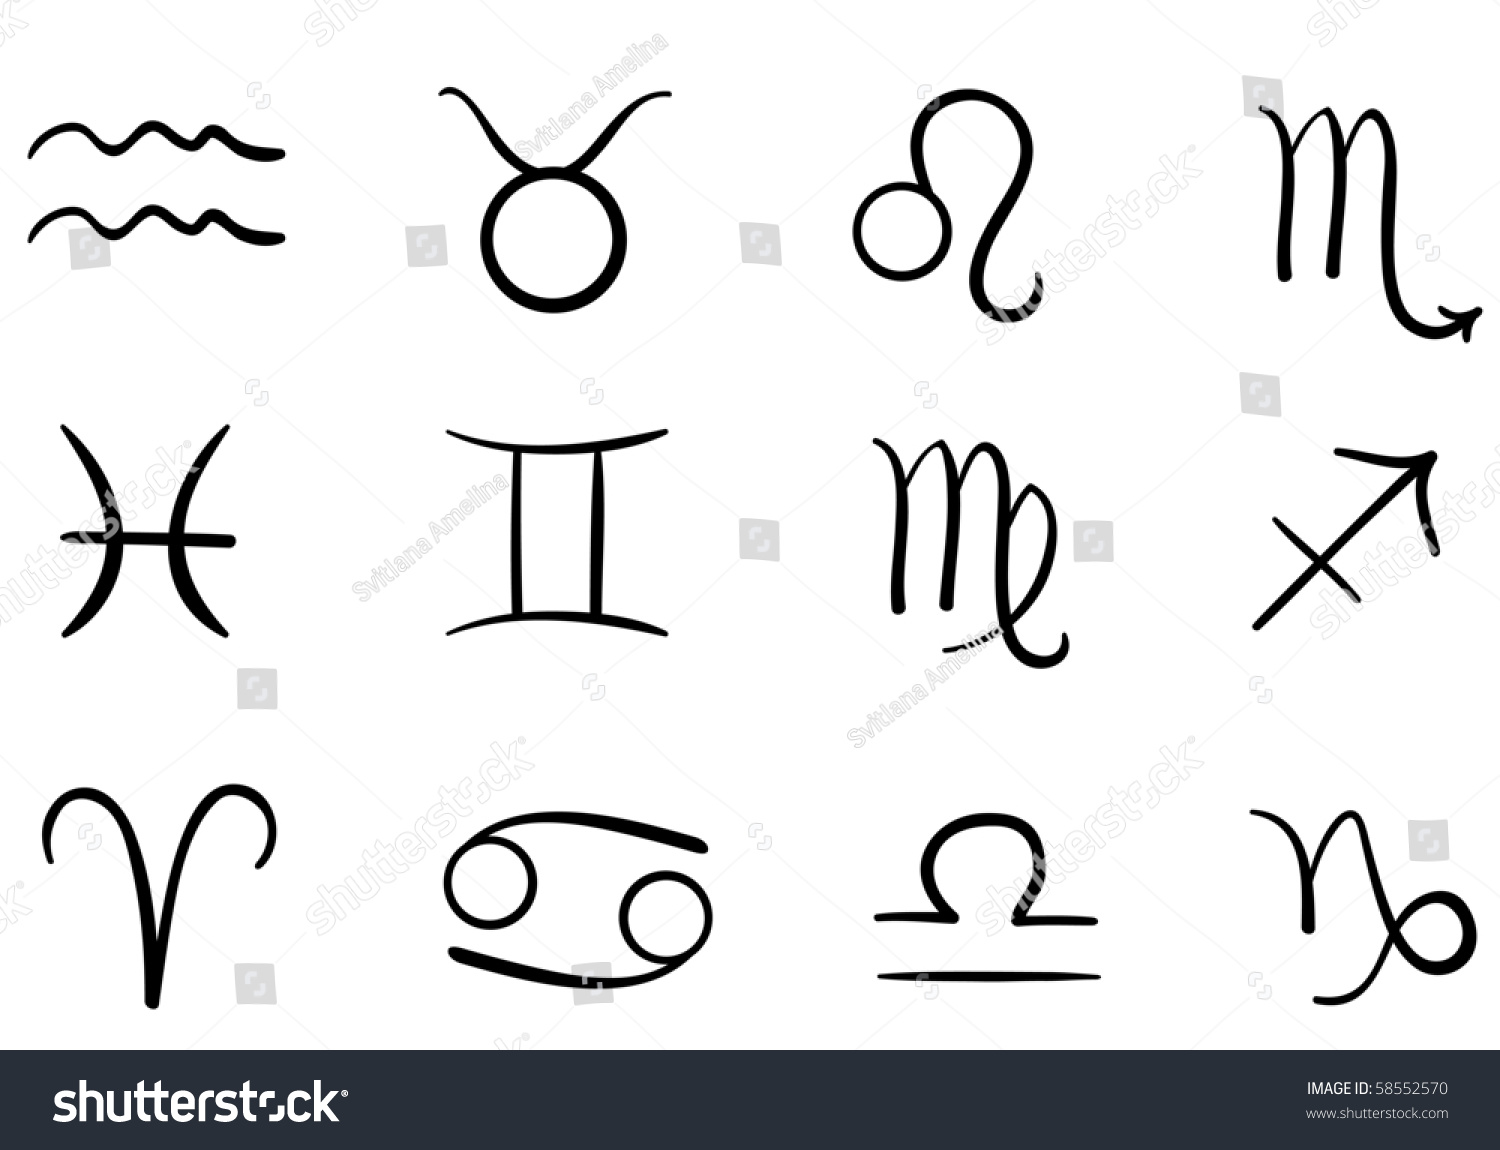 Zodiac Signs On White Background Stock Vector 58552570 - Shutterstock